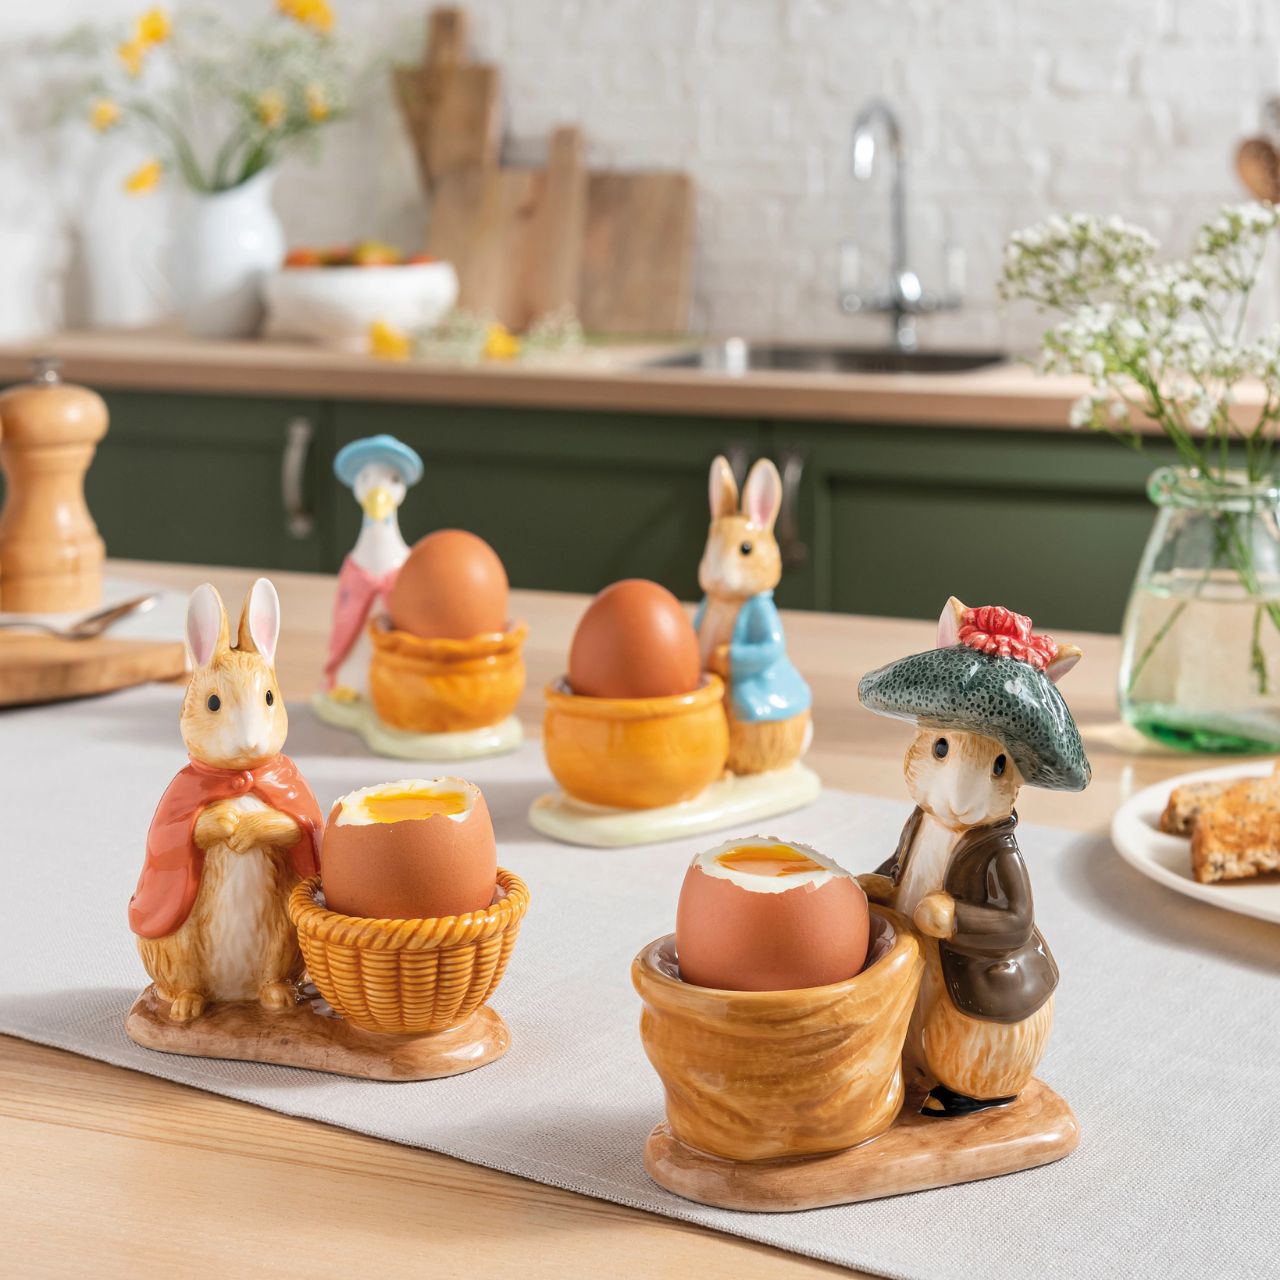 Peter Rabbit Egg Cup  Serve your morning eggs in style with our unique and charming Peter Rabbit egg cup, because regular egg cups aren't all they're cracked up to be...This beautiful Beatrix Potter egg cup has been made from sturdy ceramic and makes the ideal collector's piece or gift. We recommend you use large eggs to feel the true benefit, or why not fill with mini chocolate eggs for a sweet easter gift.